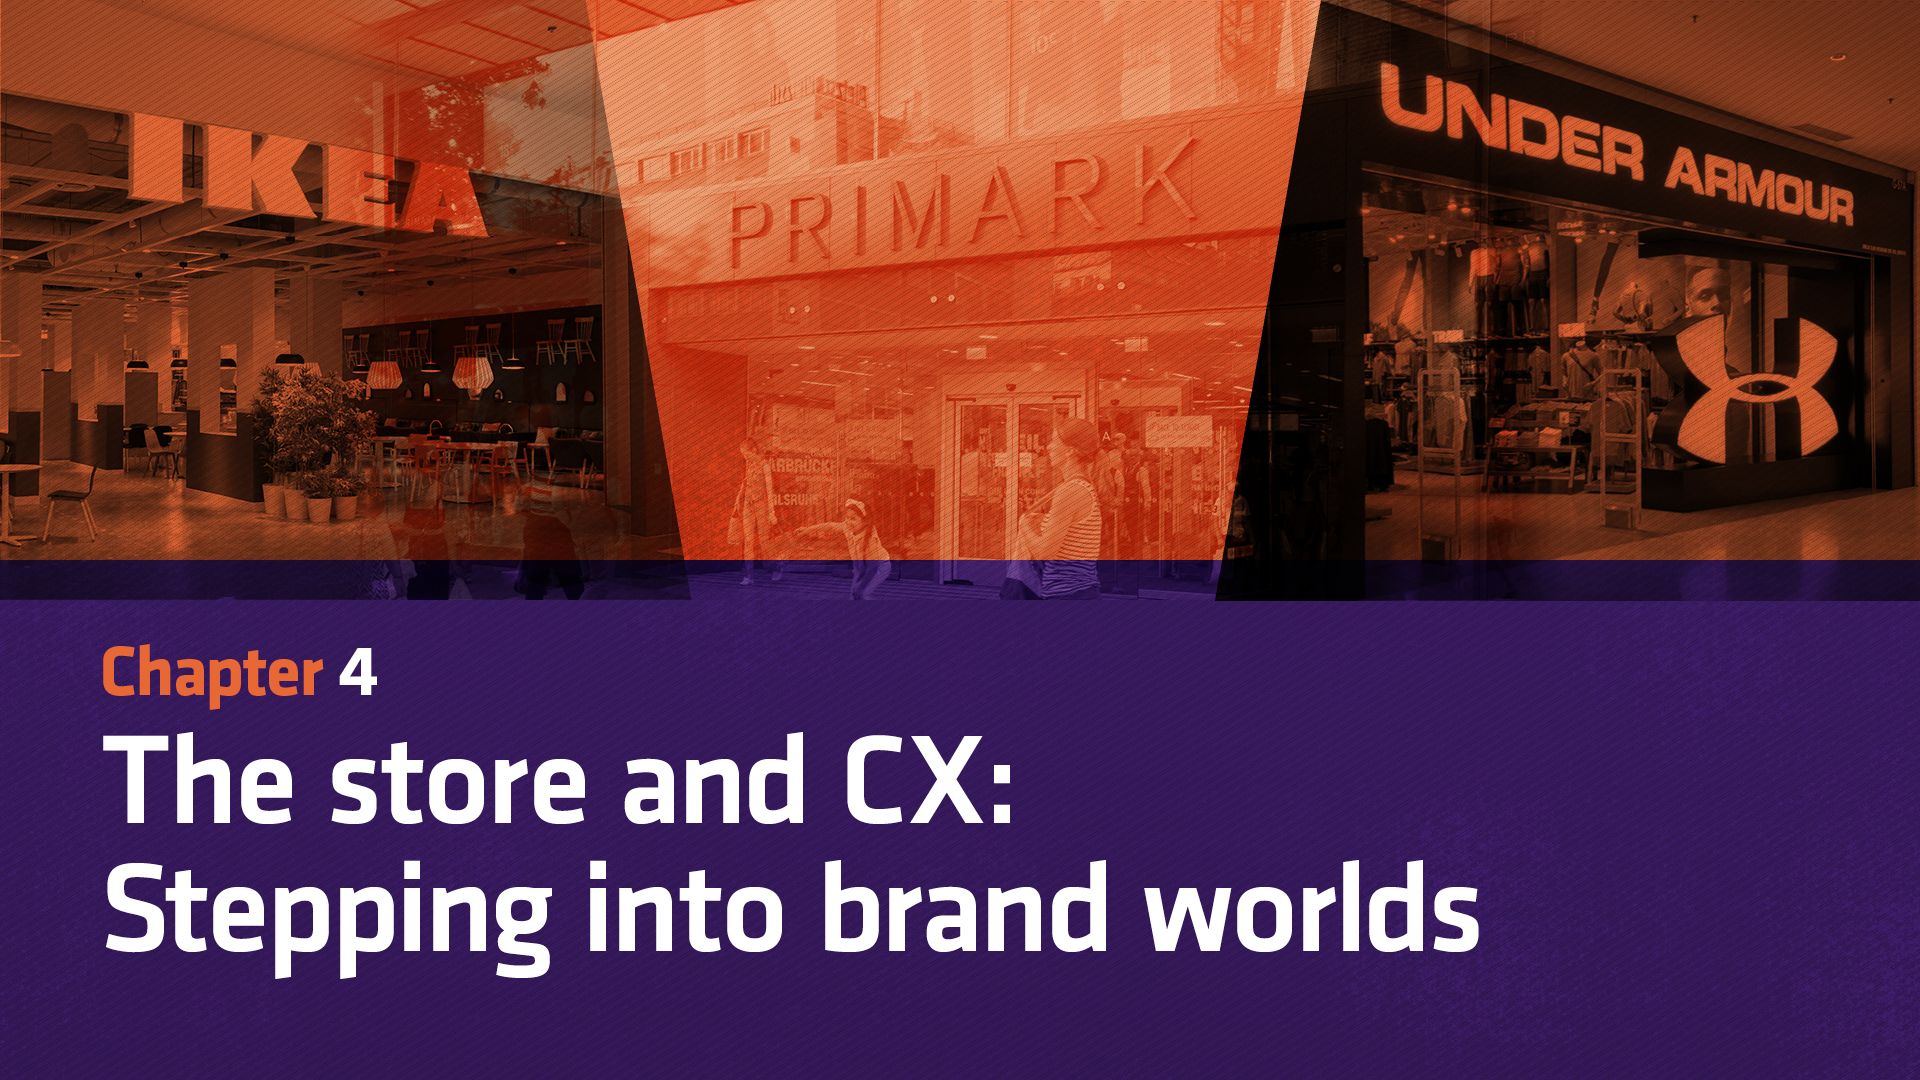 Store fronts for Ikea, Primark and Under Armour with text reading: Chapter 4. The store and CX: Stepping into brand worlds